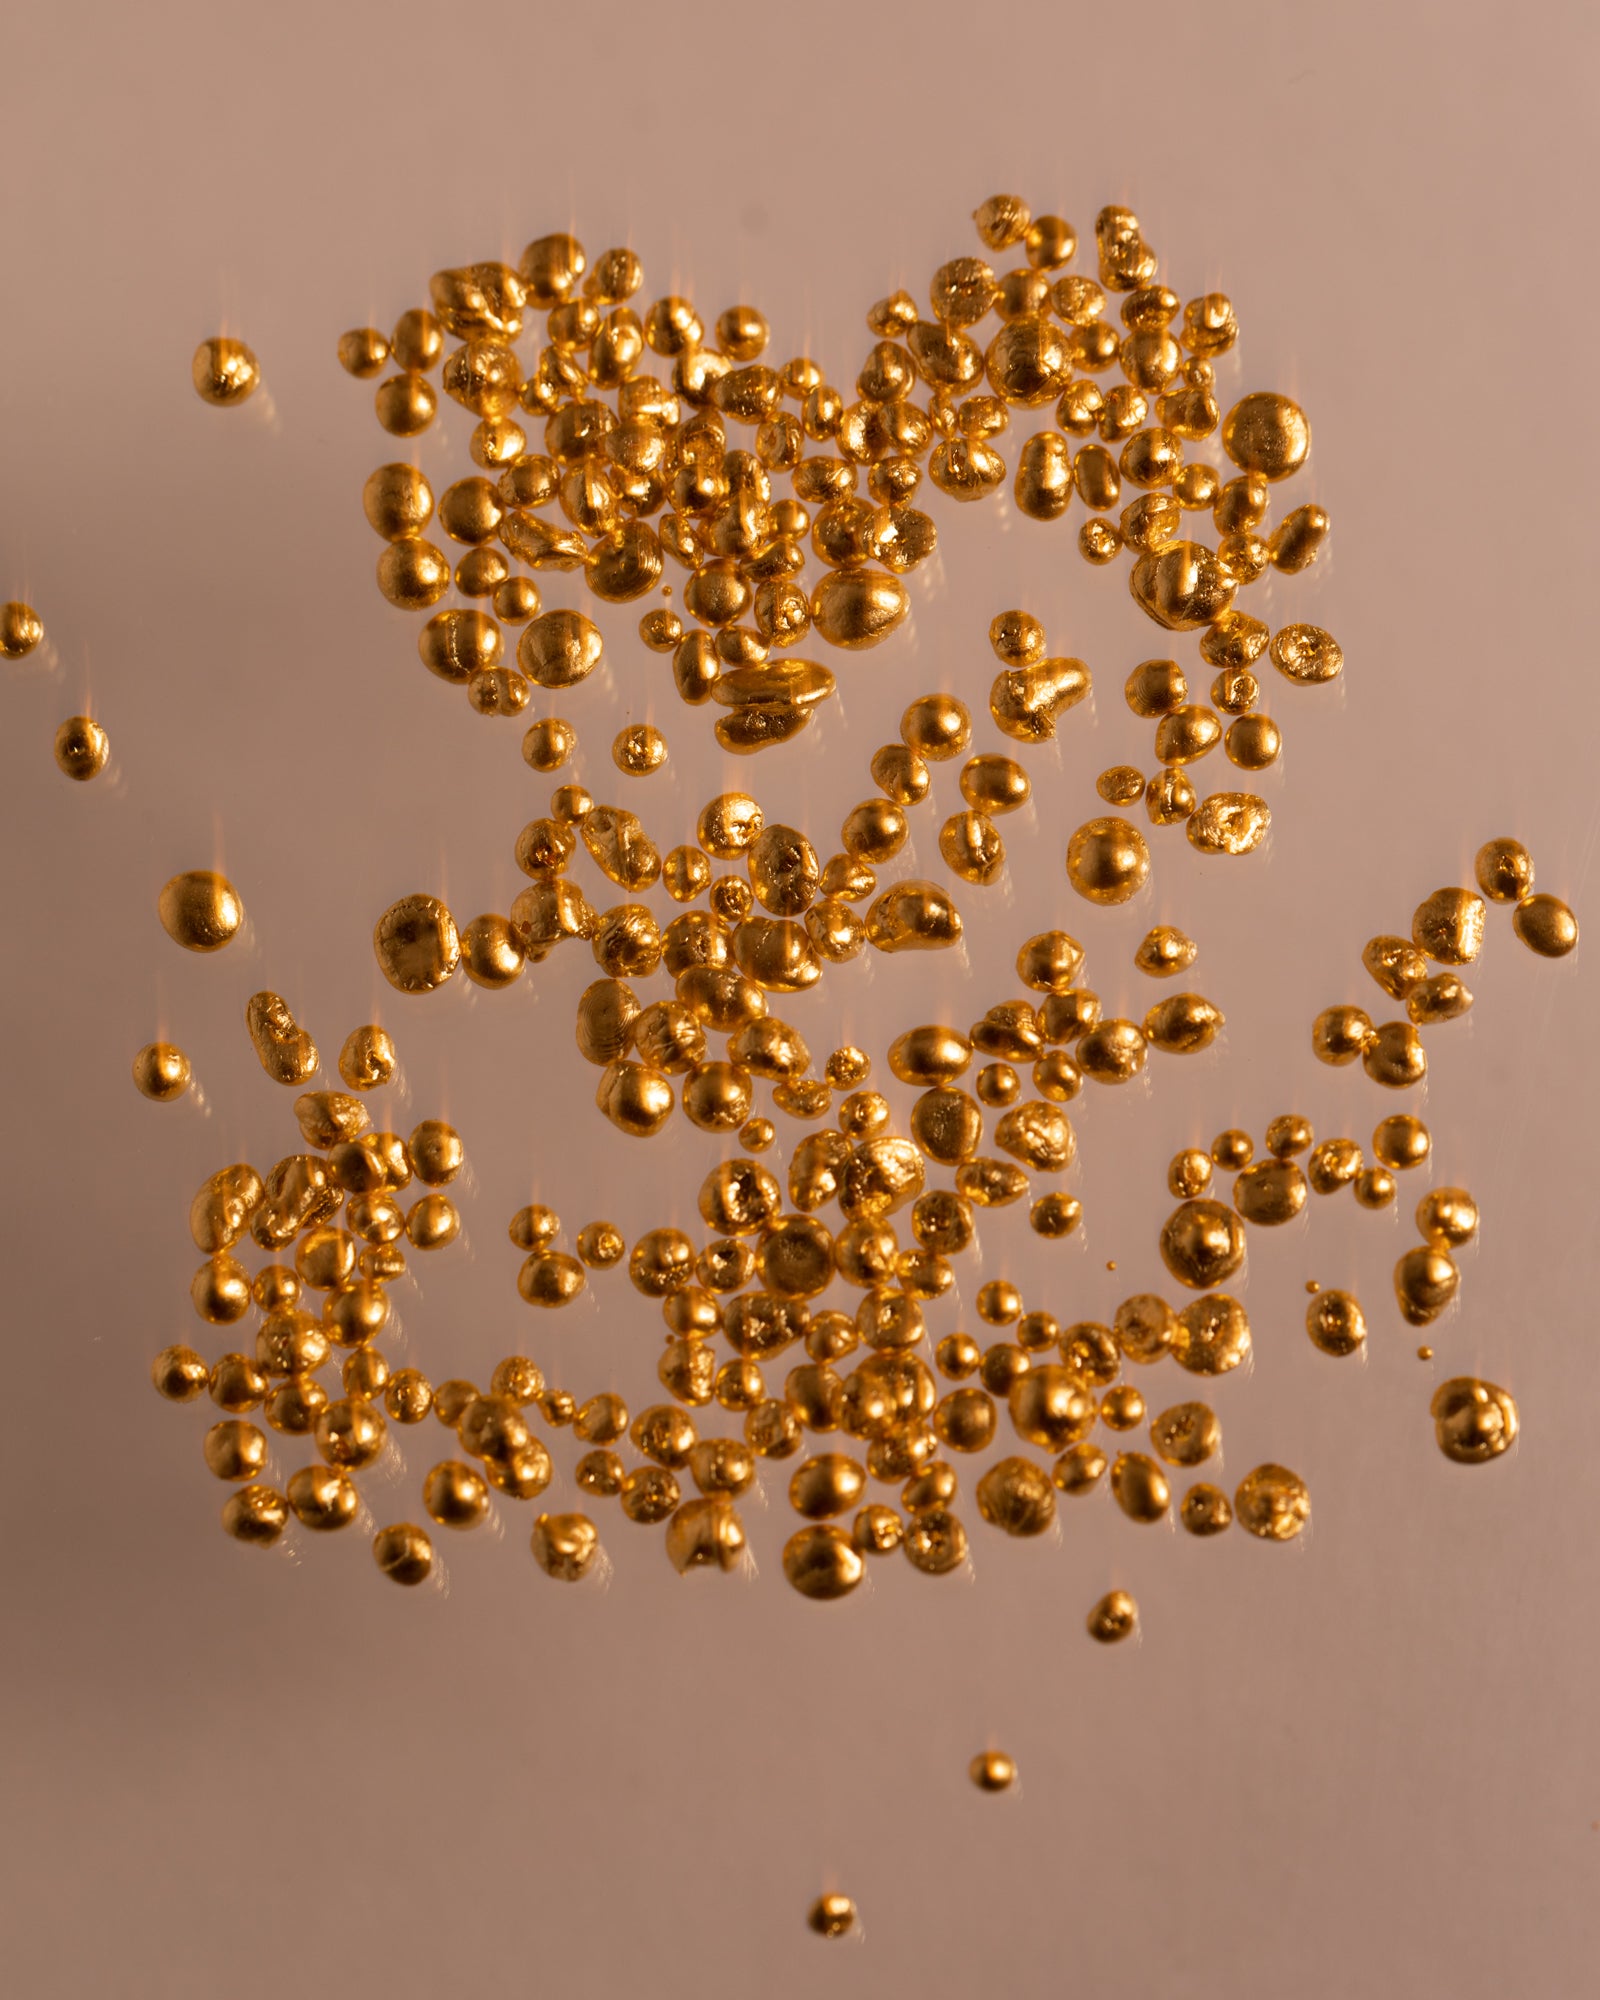 Recycle gold versus Ethical gold: how to choose?